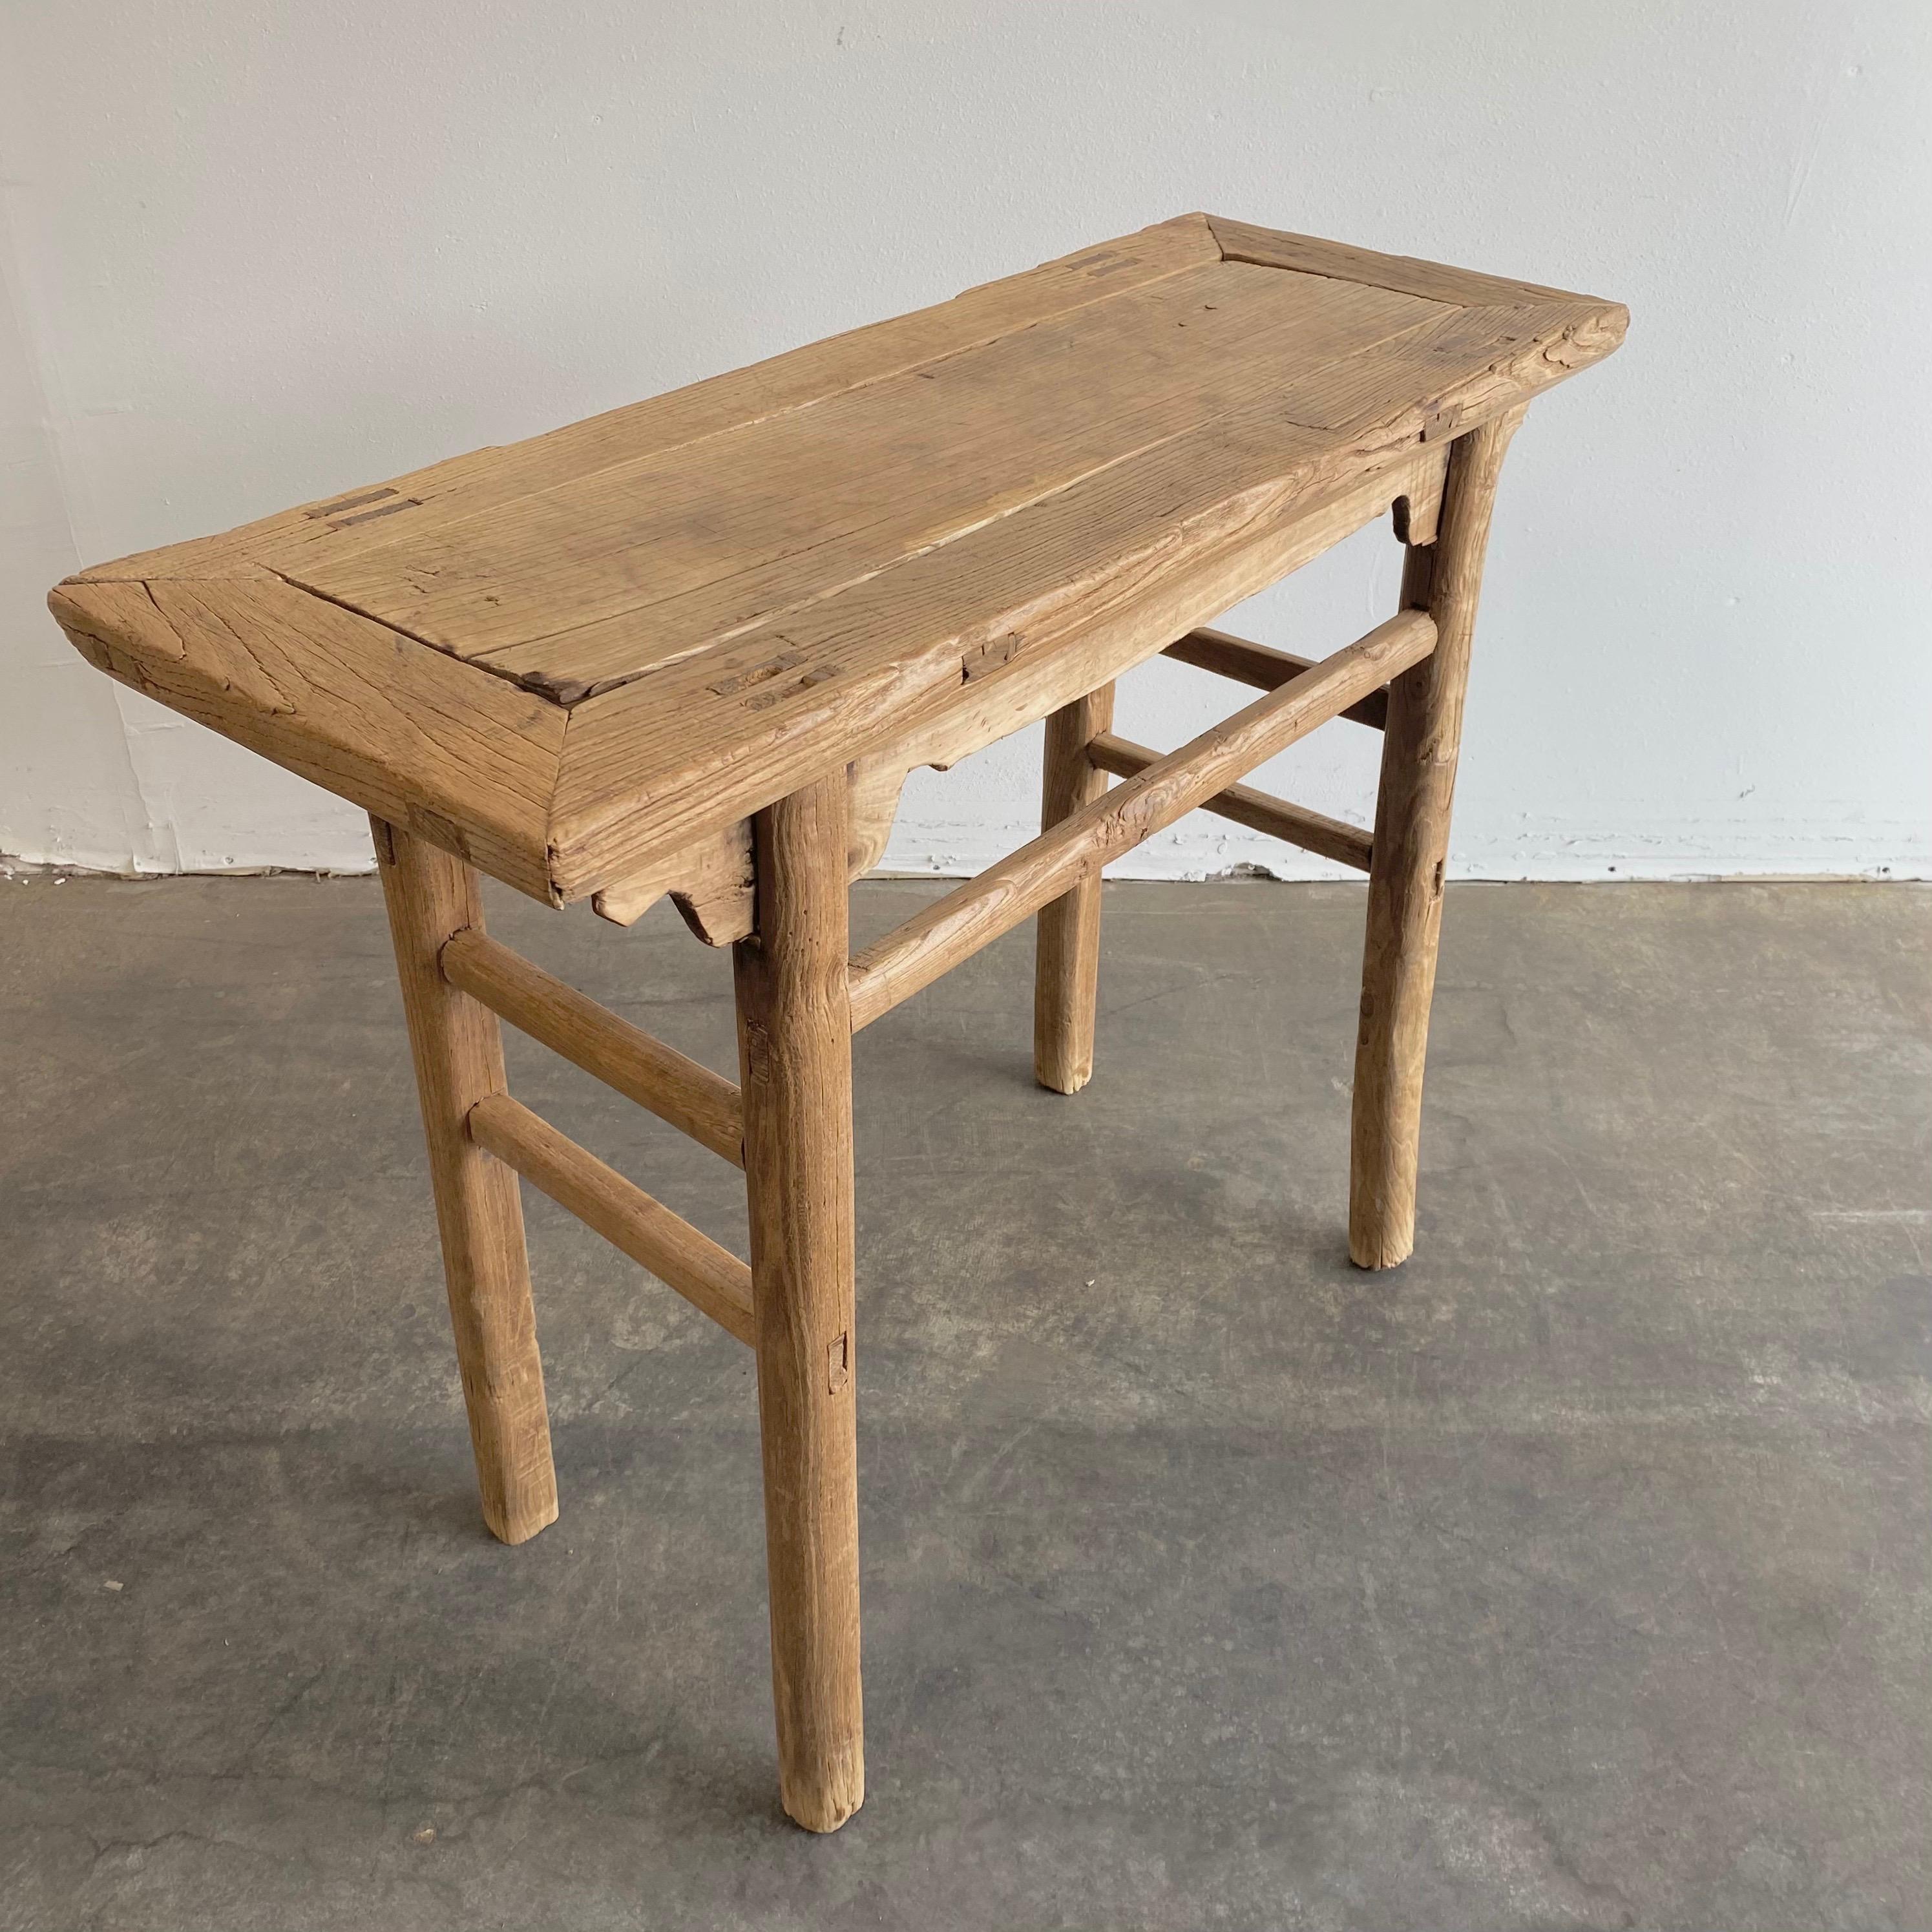 Vintage Antique Elm wood console table
Made from Vintage reclaimed elm wood. Beautiful antique patina, with weathering and age, these are solid and sturdy ready for daily use, use as a entry table, sofa table or console in a dining room. Great in a